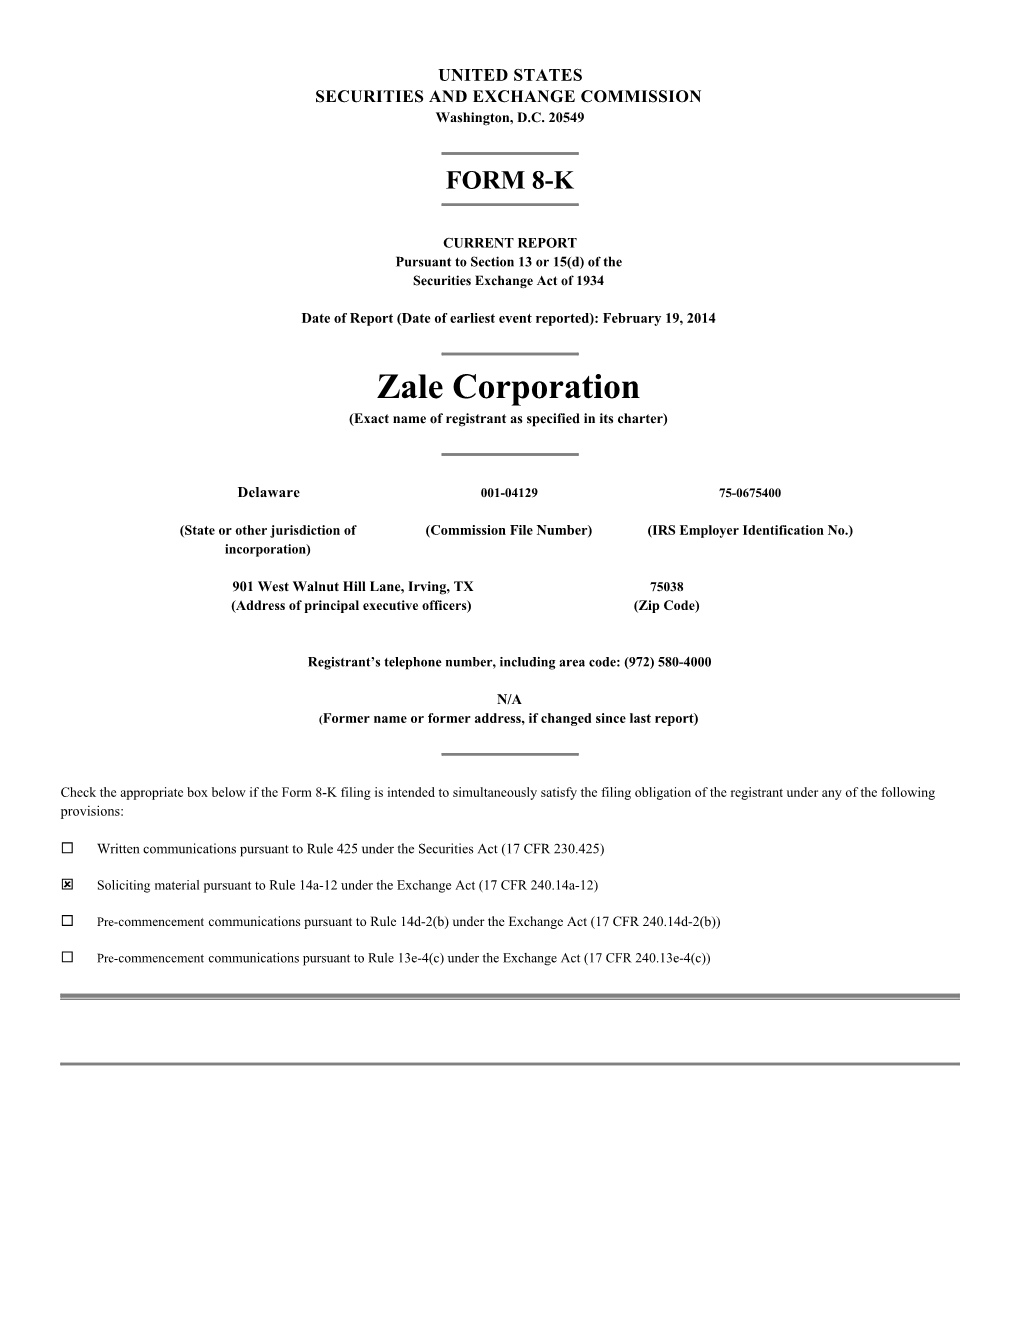 Zale Corporation (Exact Name of Registrant As Specified in Its Charter)